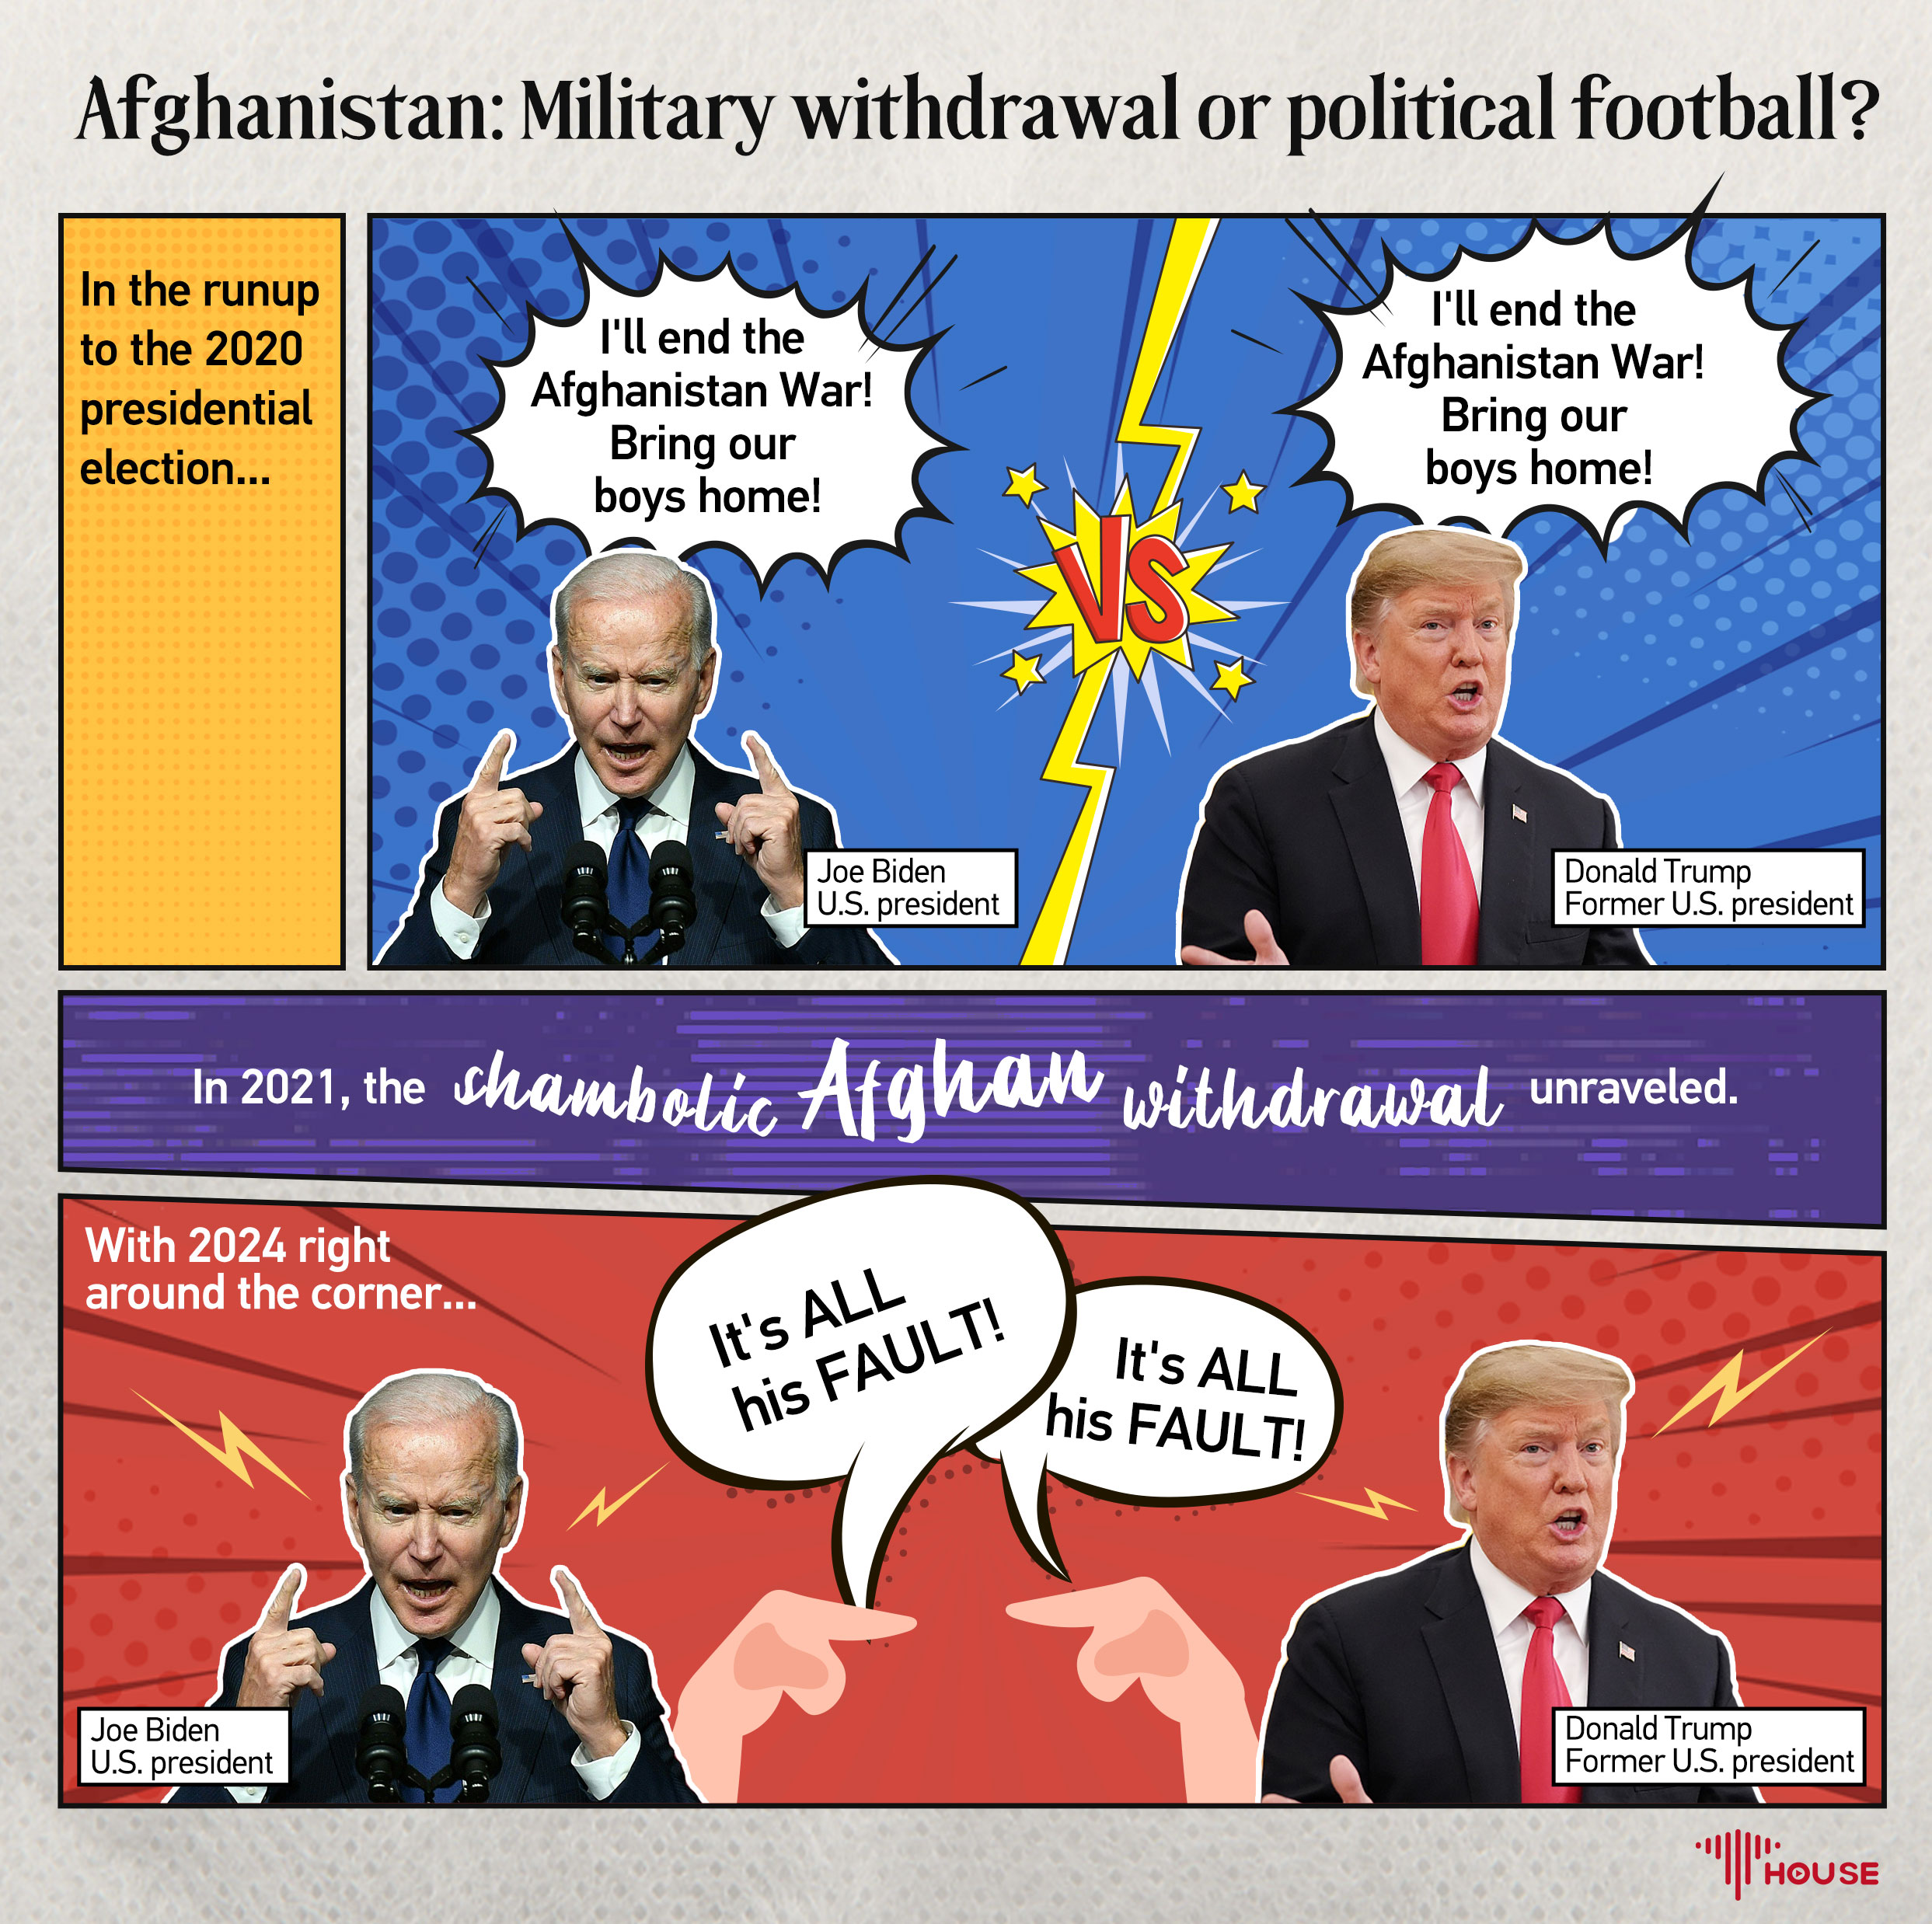 Afghanistan: Military withdrawal or political football?